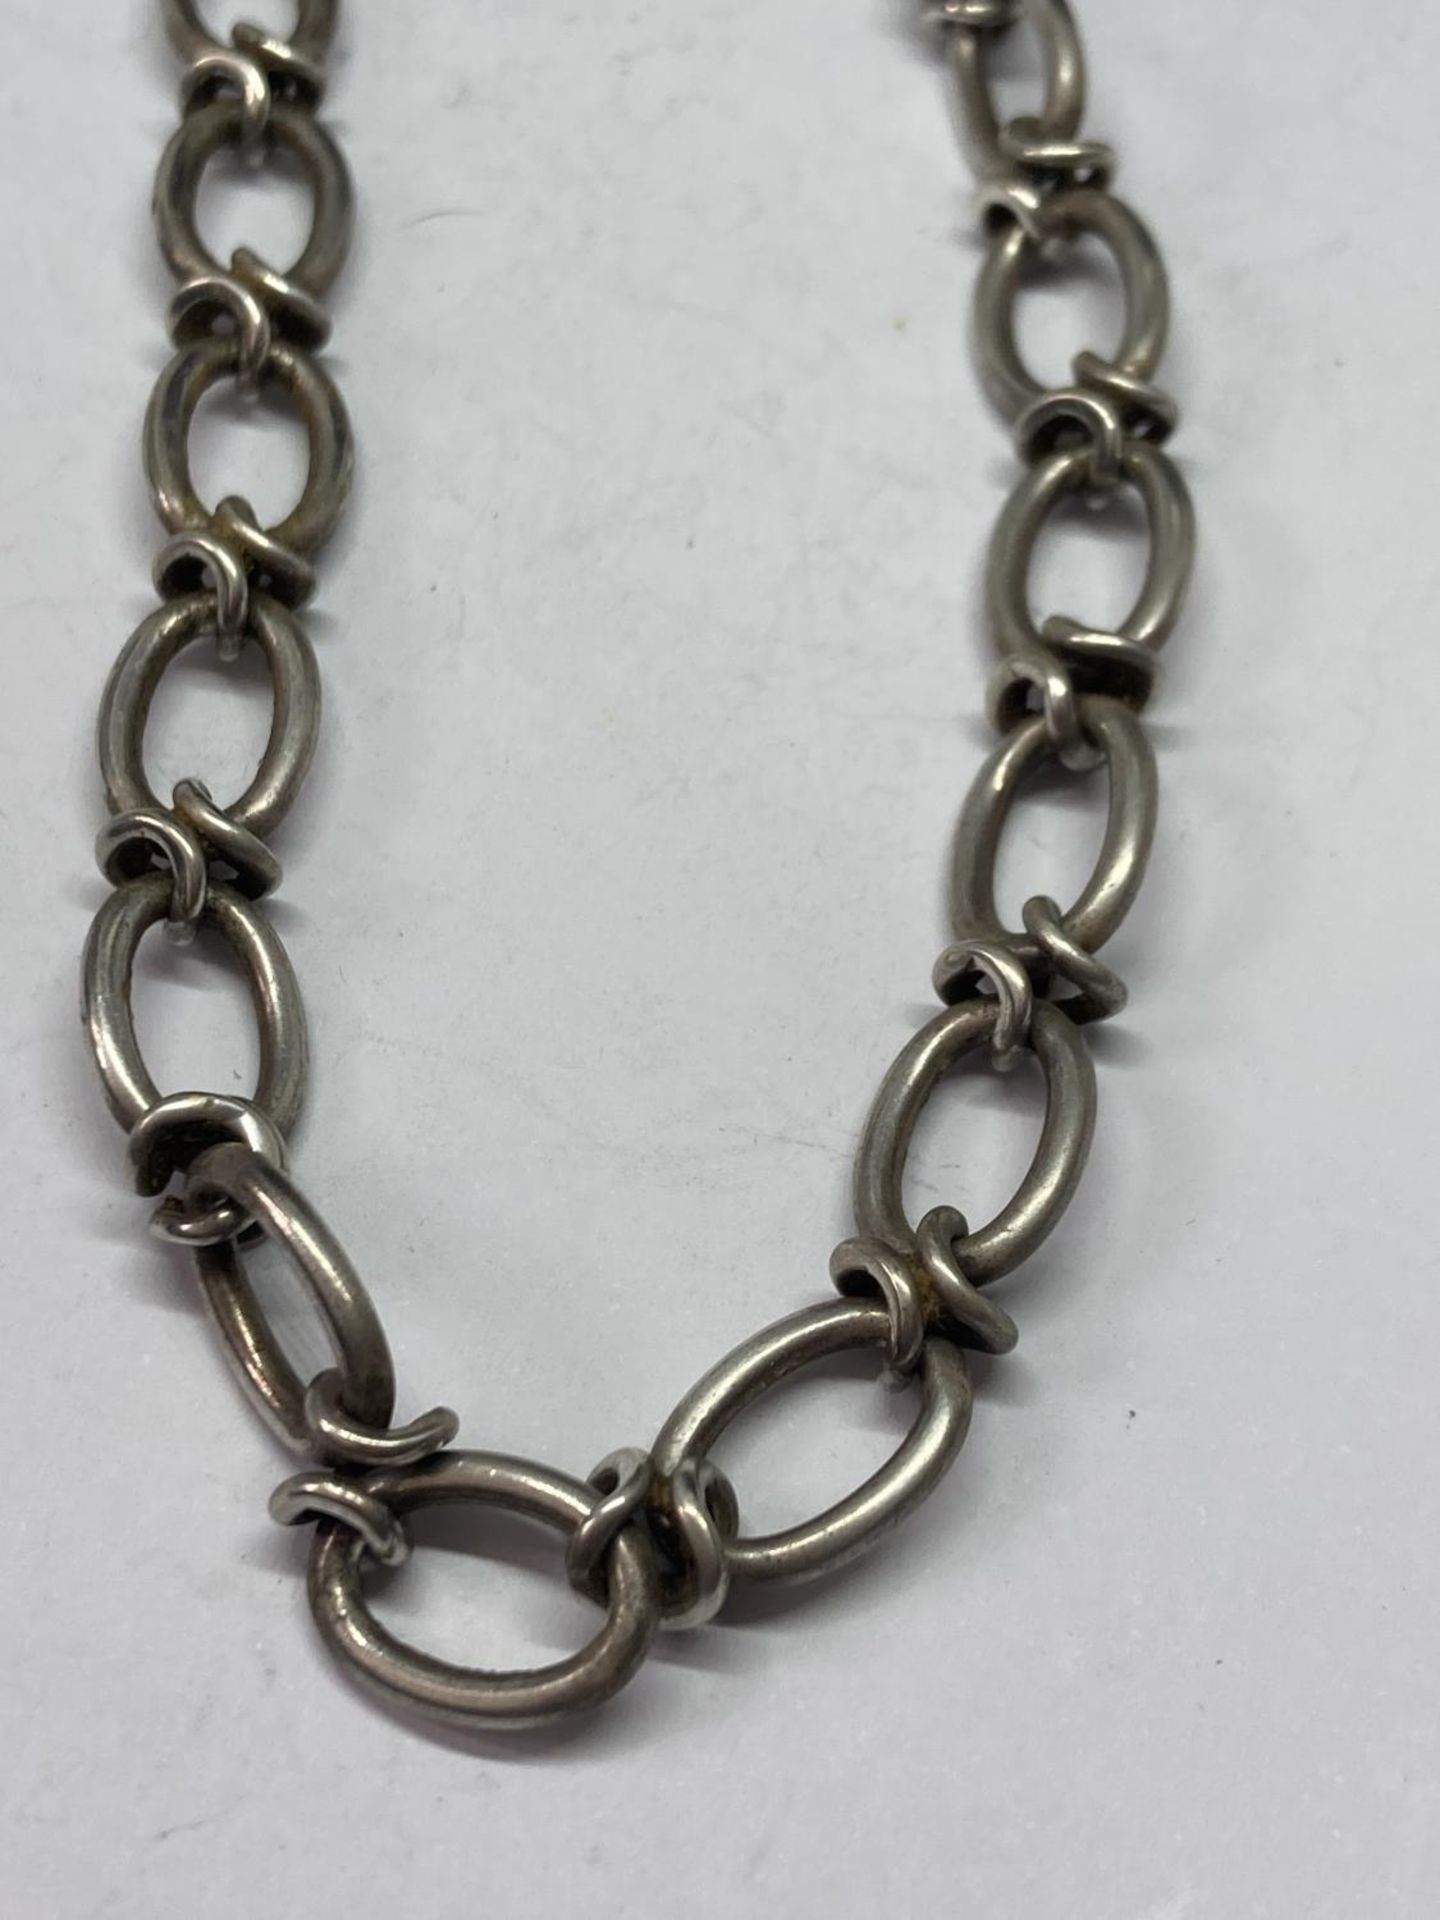 A HEAVY SILVER NECK CHAIN - Image 2 of 3